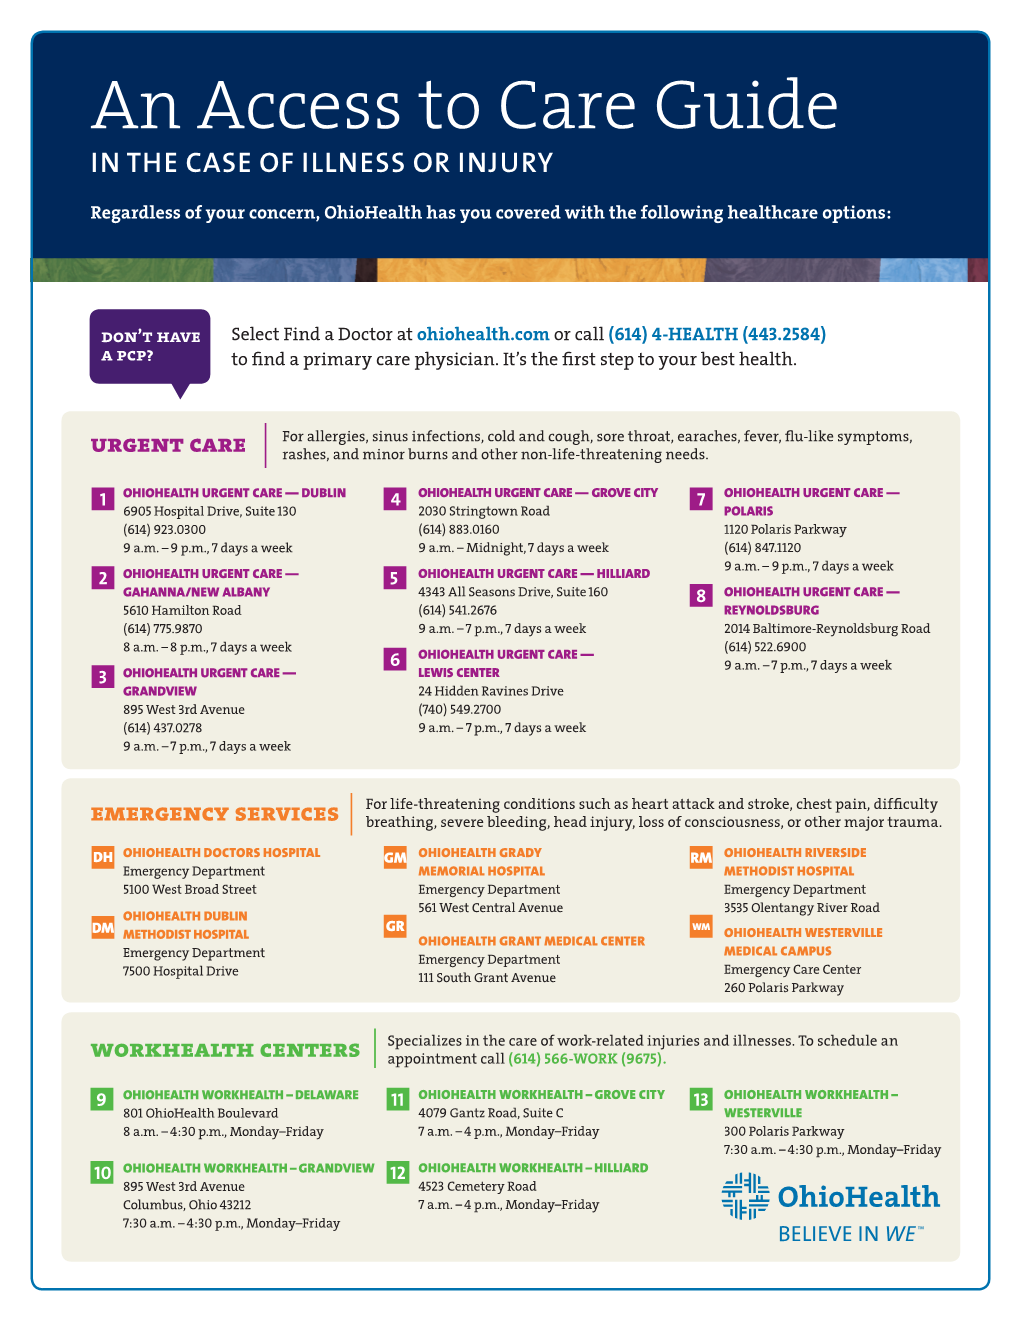 An Access to Care Guide in the CASE of ILLNESS OR INJURY